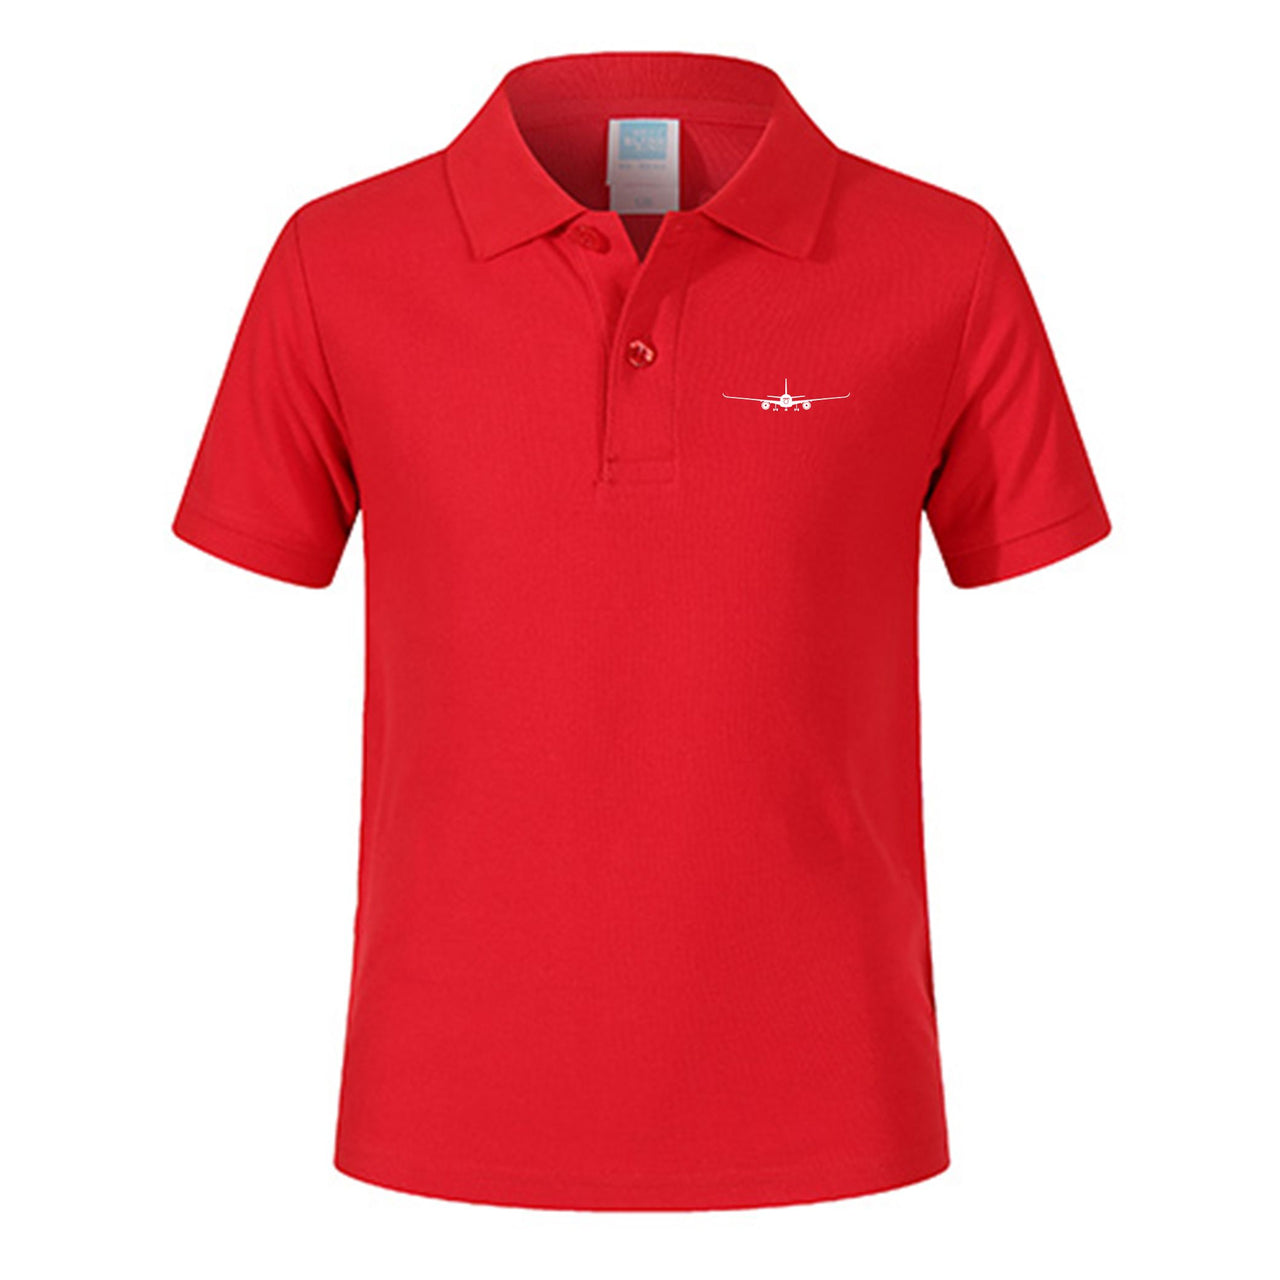 Airbus A350 Silhouette Designed Children Polo T-Shirts